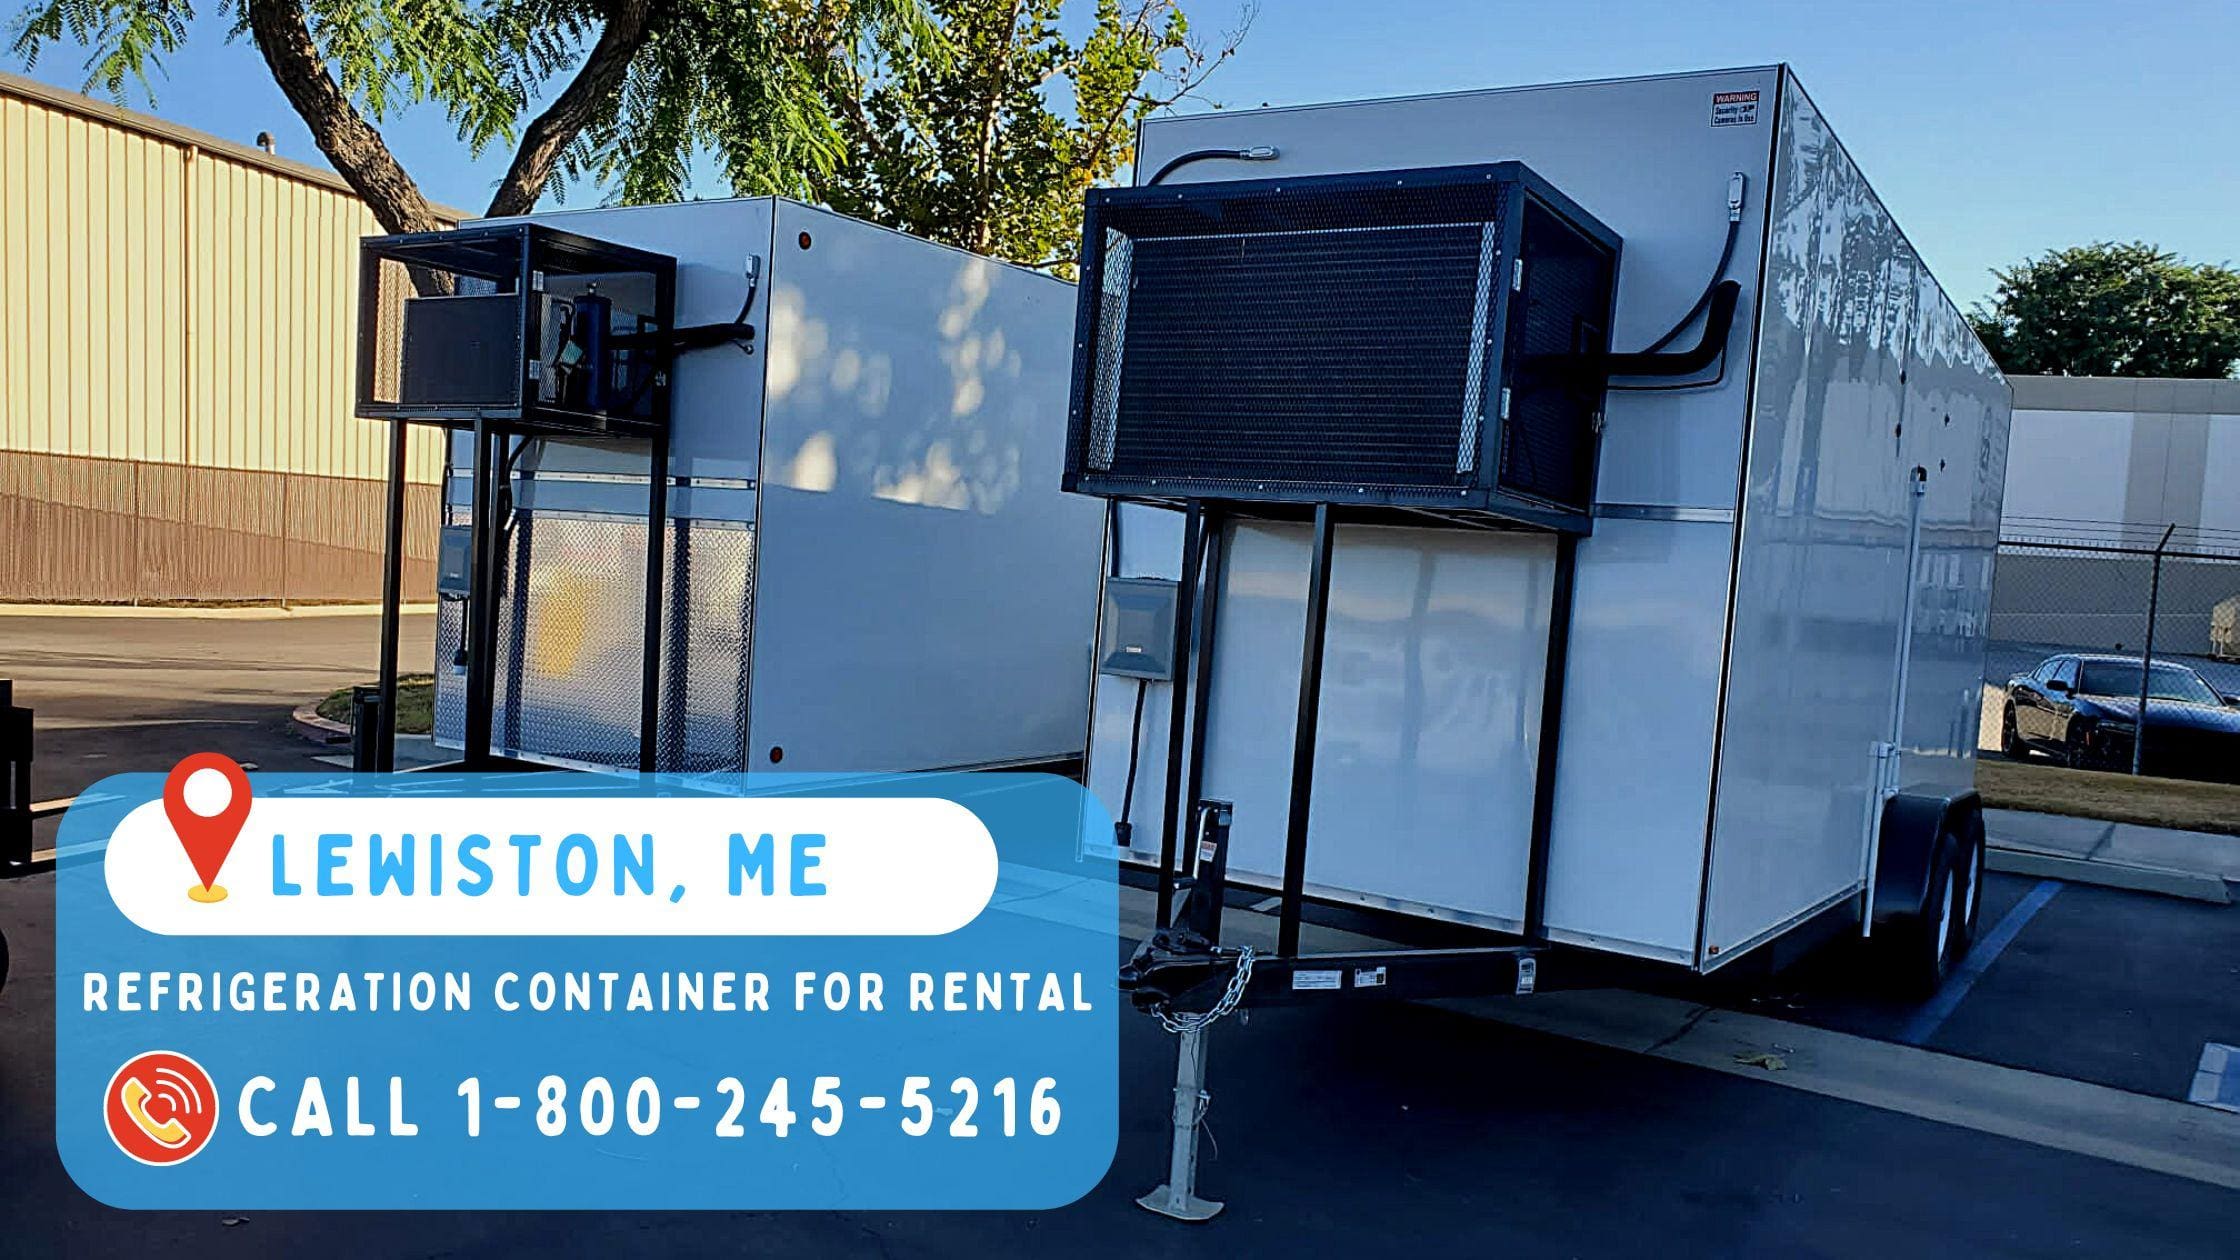 Refrigeration Container for rental Lewiston, ME